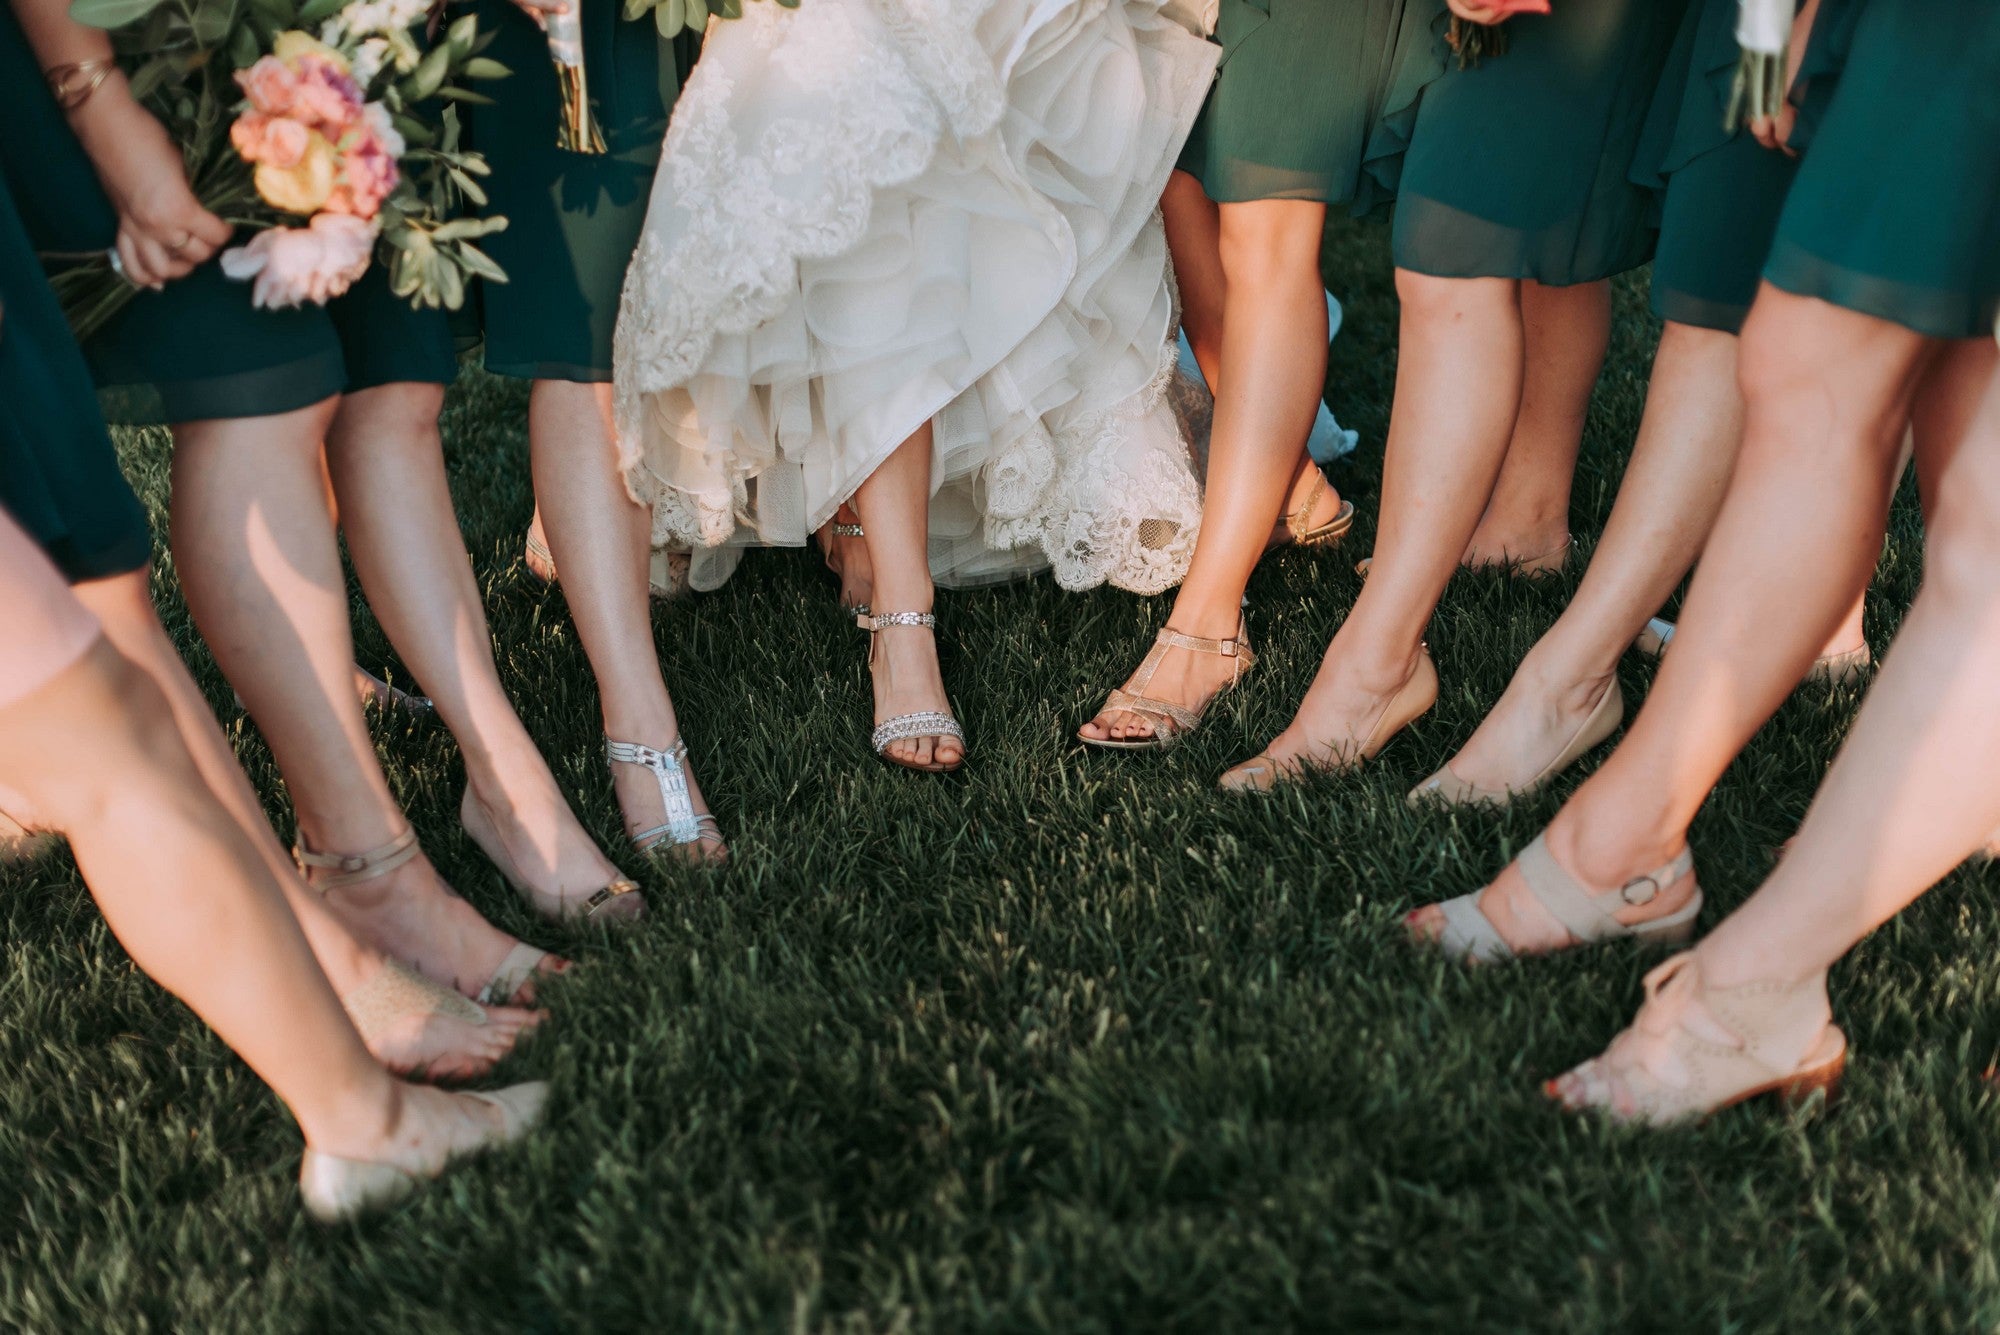 a group of women showing their wedding footwear from knee down